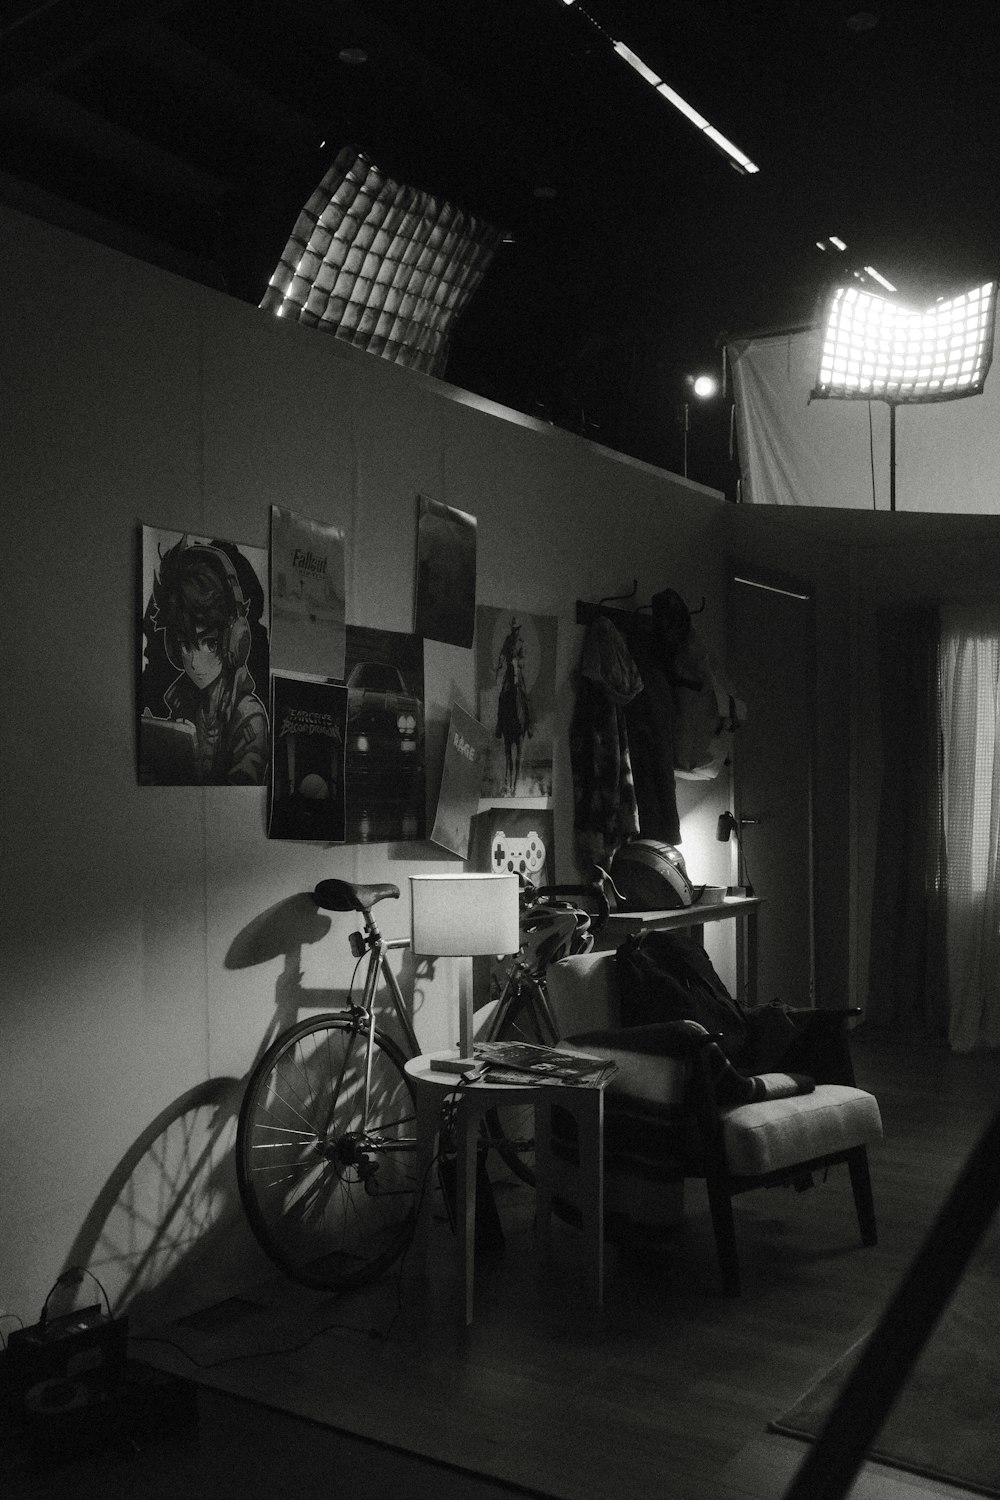 a black and white photo of a bike in a room